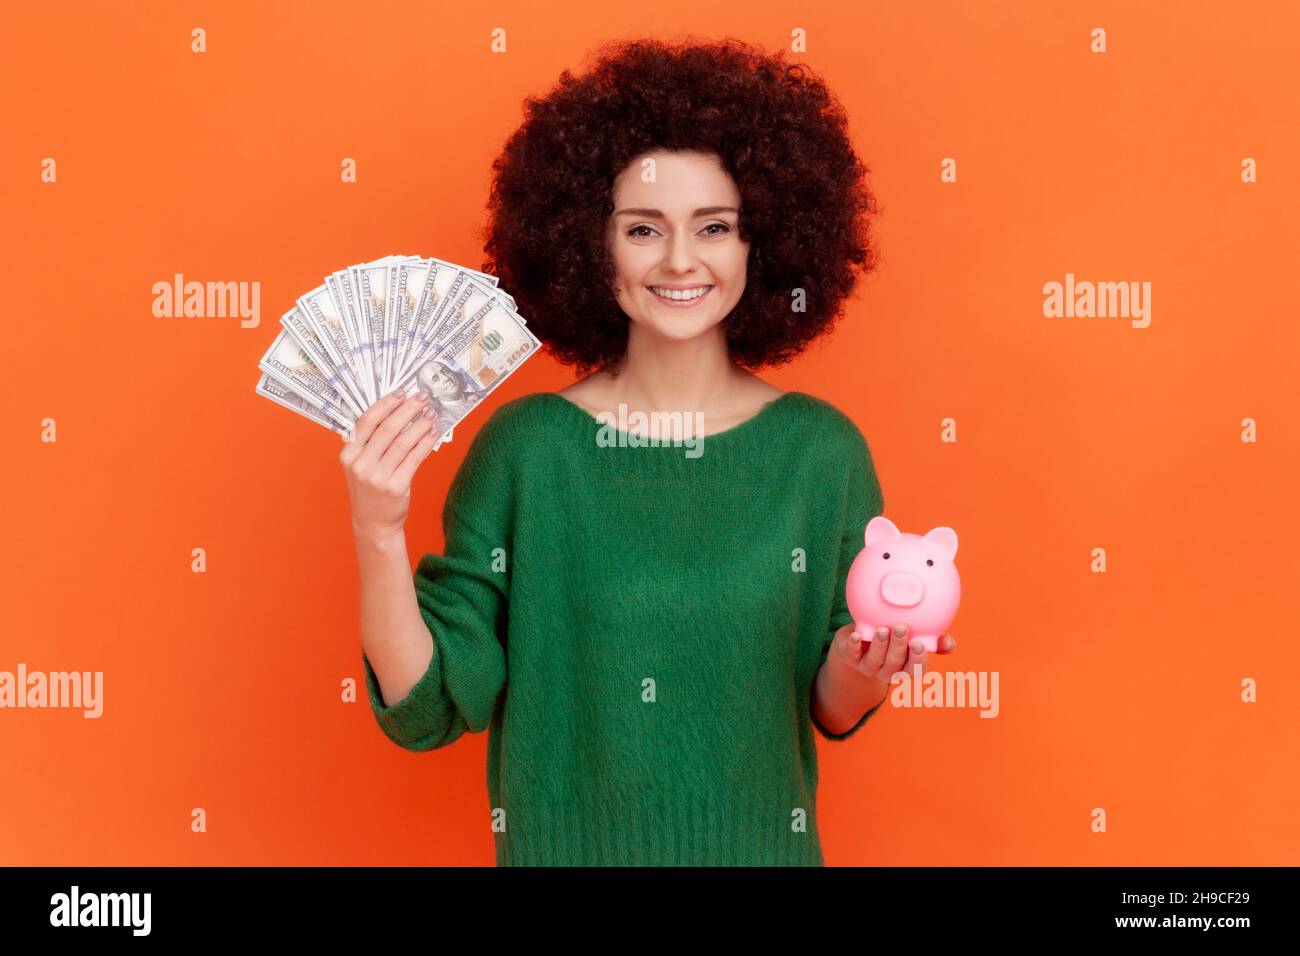 Smiling affirmative woman with Afro hairstyle wearing green casual style sweater holding big sum of money and piggy bank, profitable investment. Indoor studio shot isolated on orange background. Stock Photo